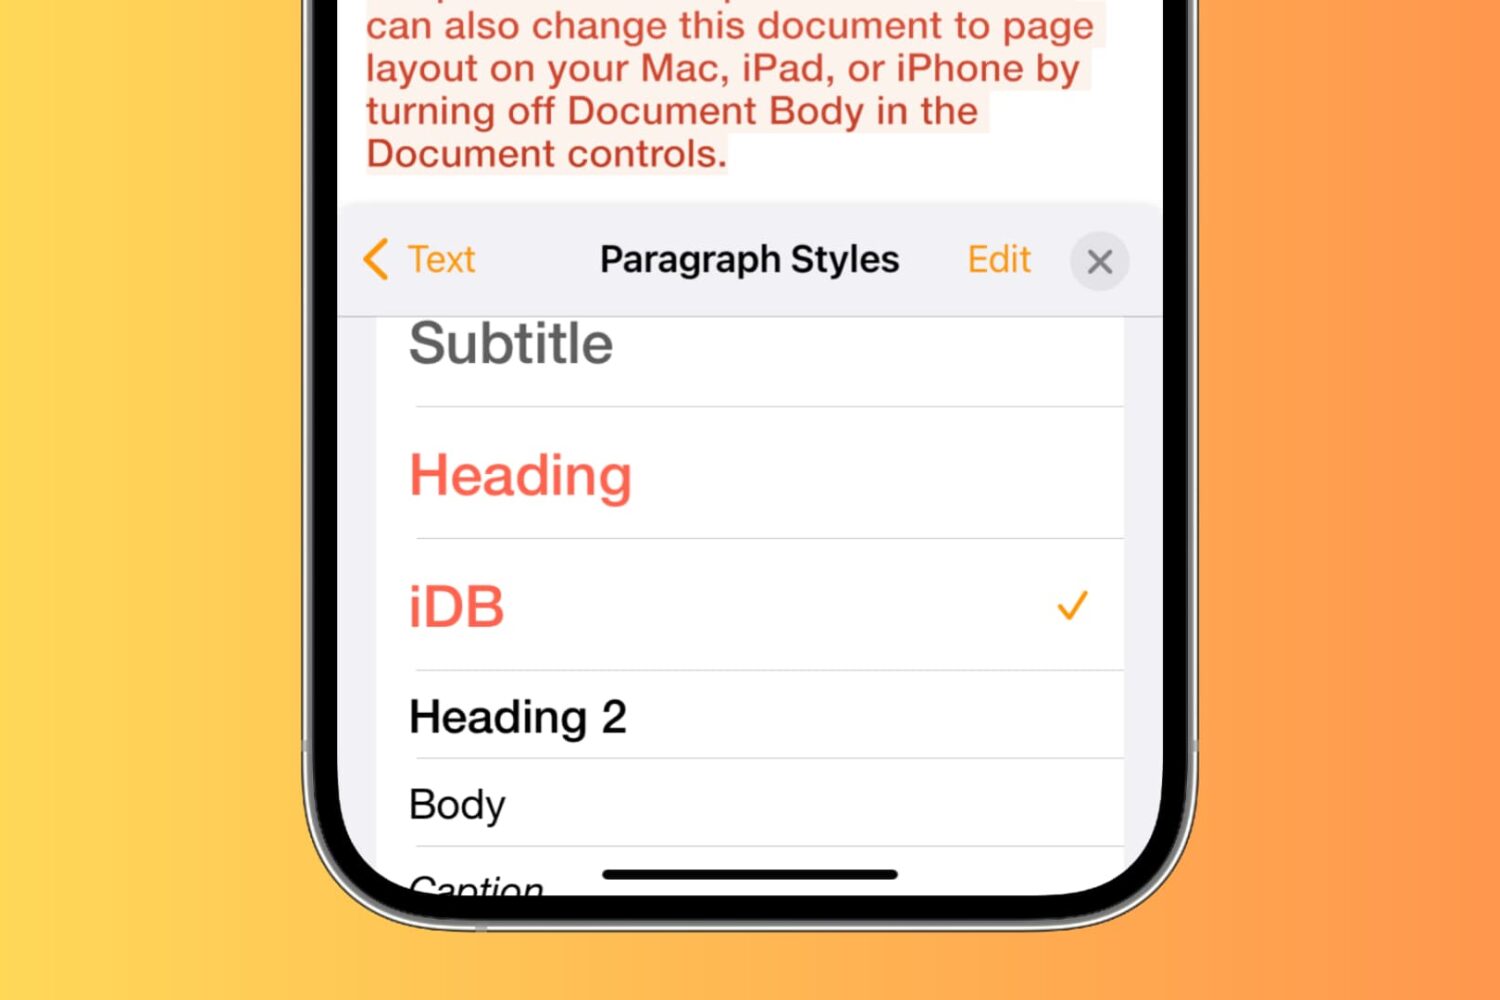 Custom Paragraph Styles in Pages on iPhone